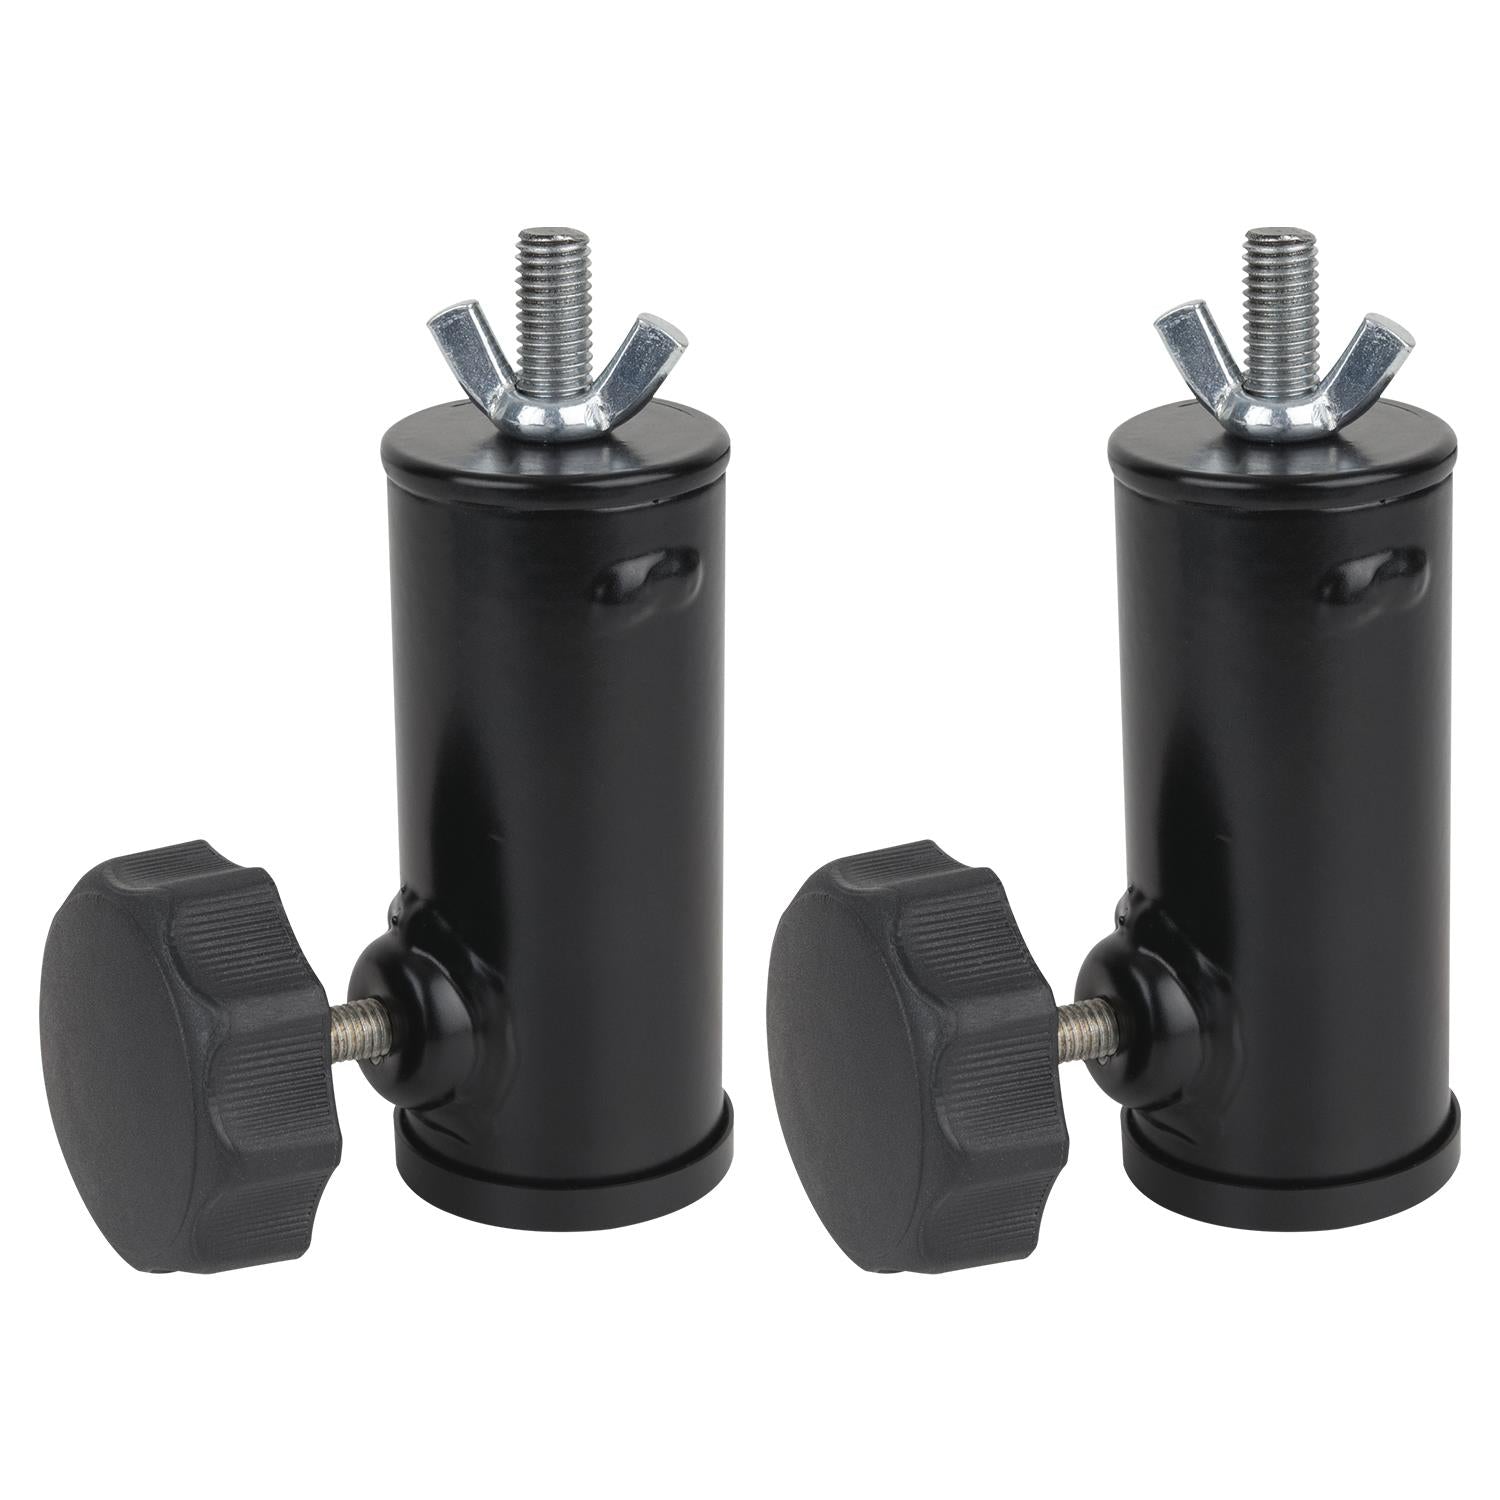 2 x Showgear M10 Lighting Stand Top Hat Adapter